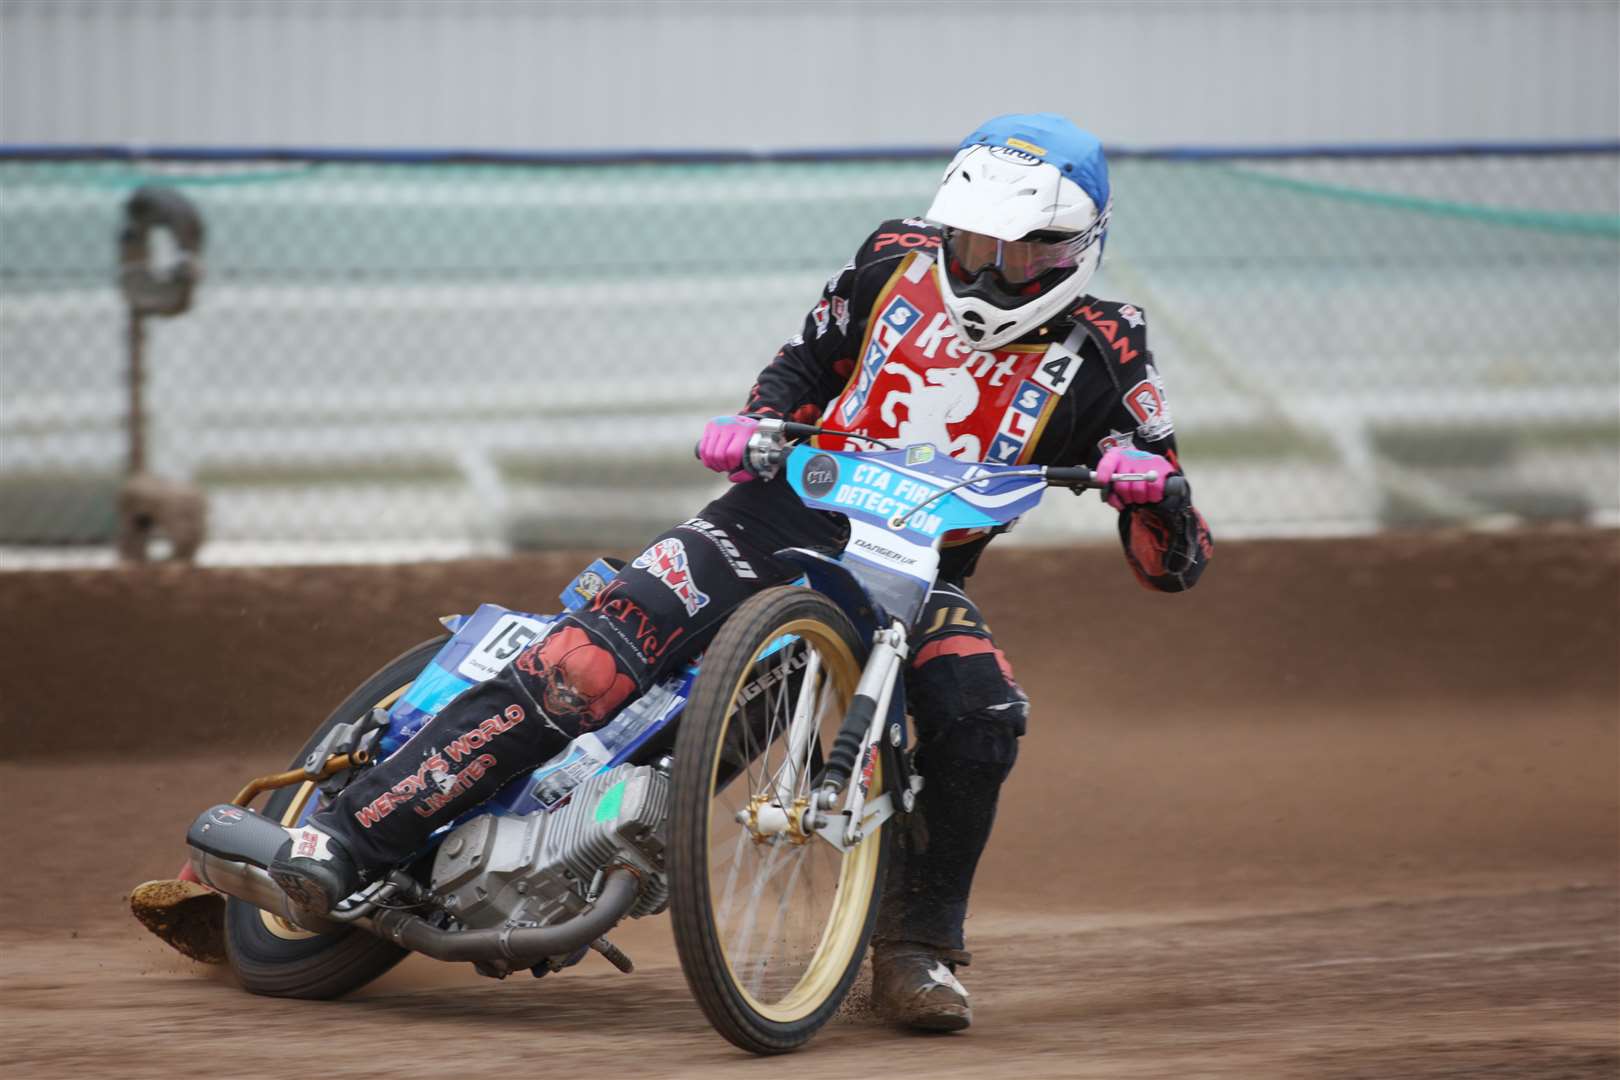 Danny Ayres for Kent Kings ride motorcycles against Mildenhall Fen Tigers at Central Park Stadium, Sittingbourne Picture: John Westhrop